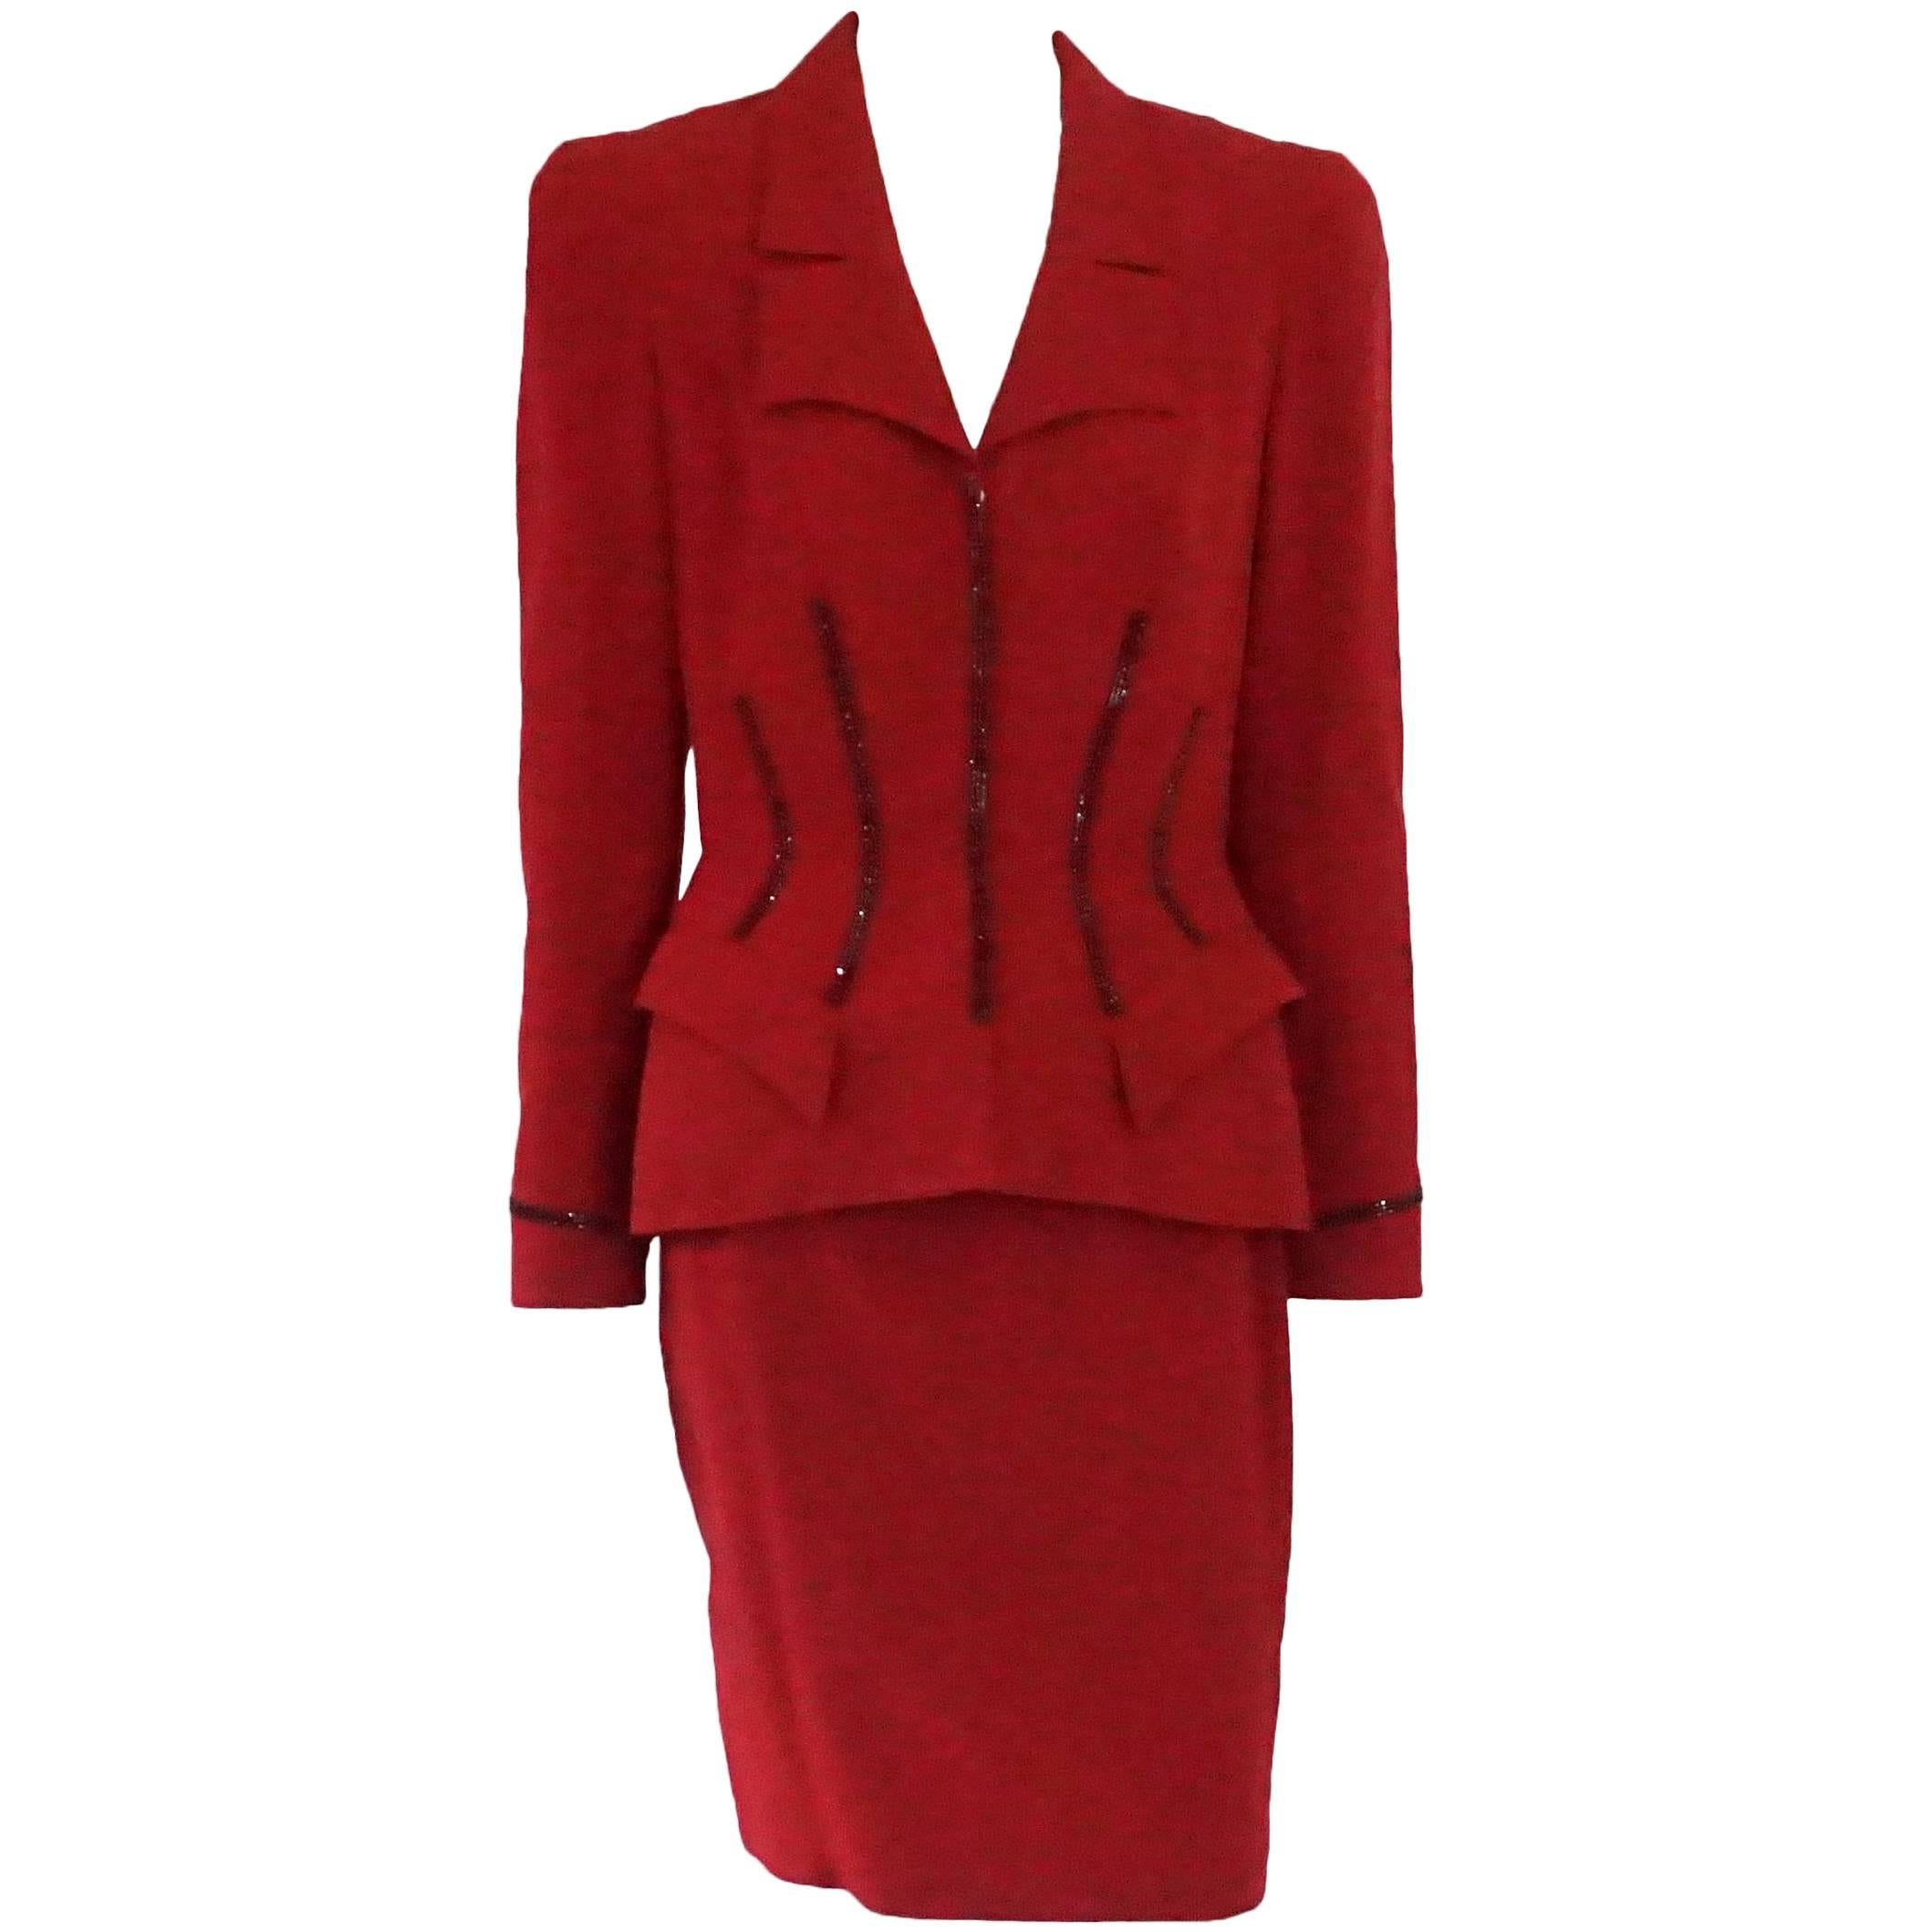 Thierry Mugler Red Wool Skirt Suit with Rhinestone Detail - 42 - Circa 80's